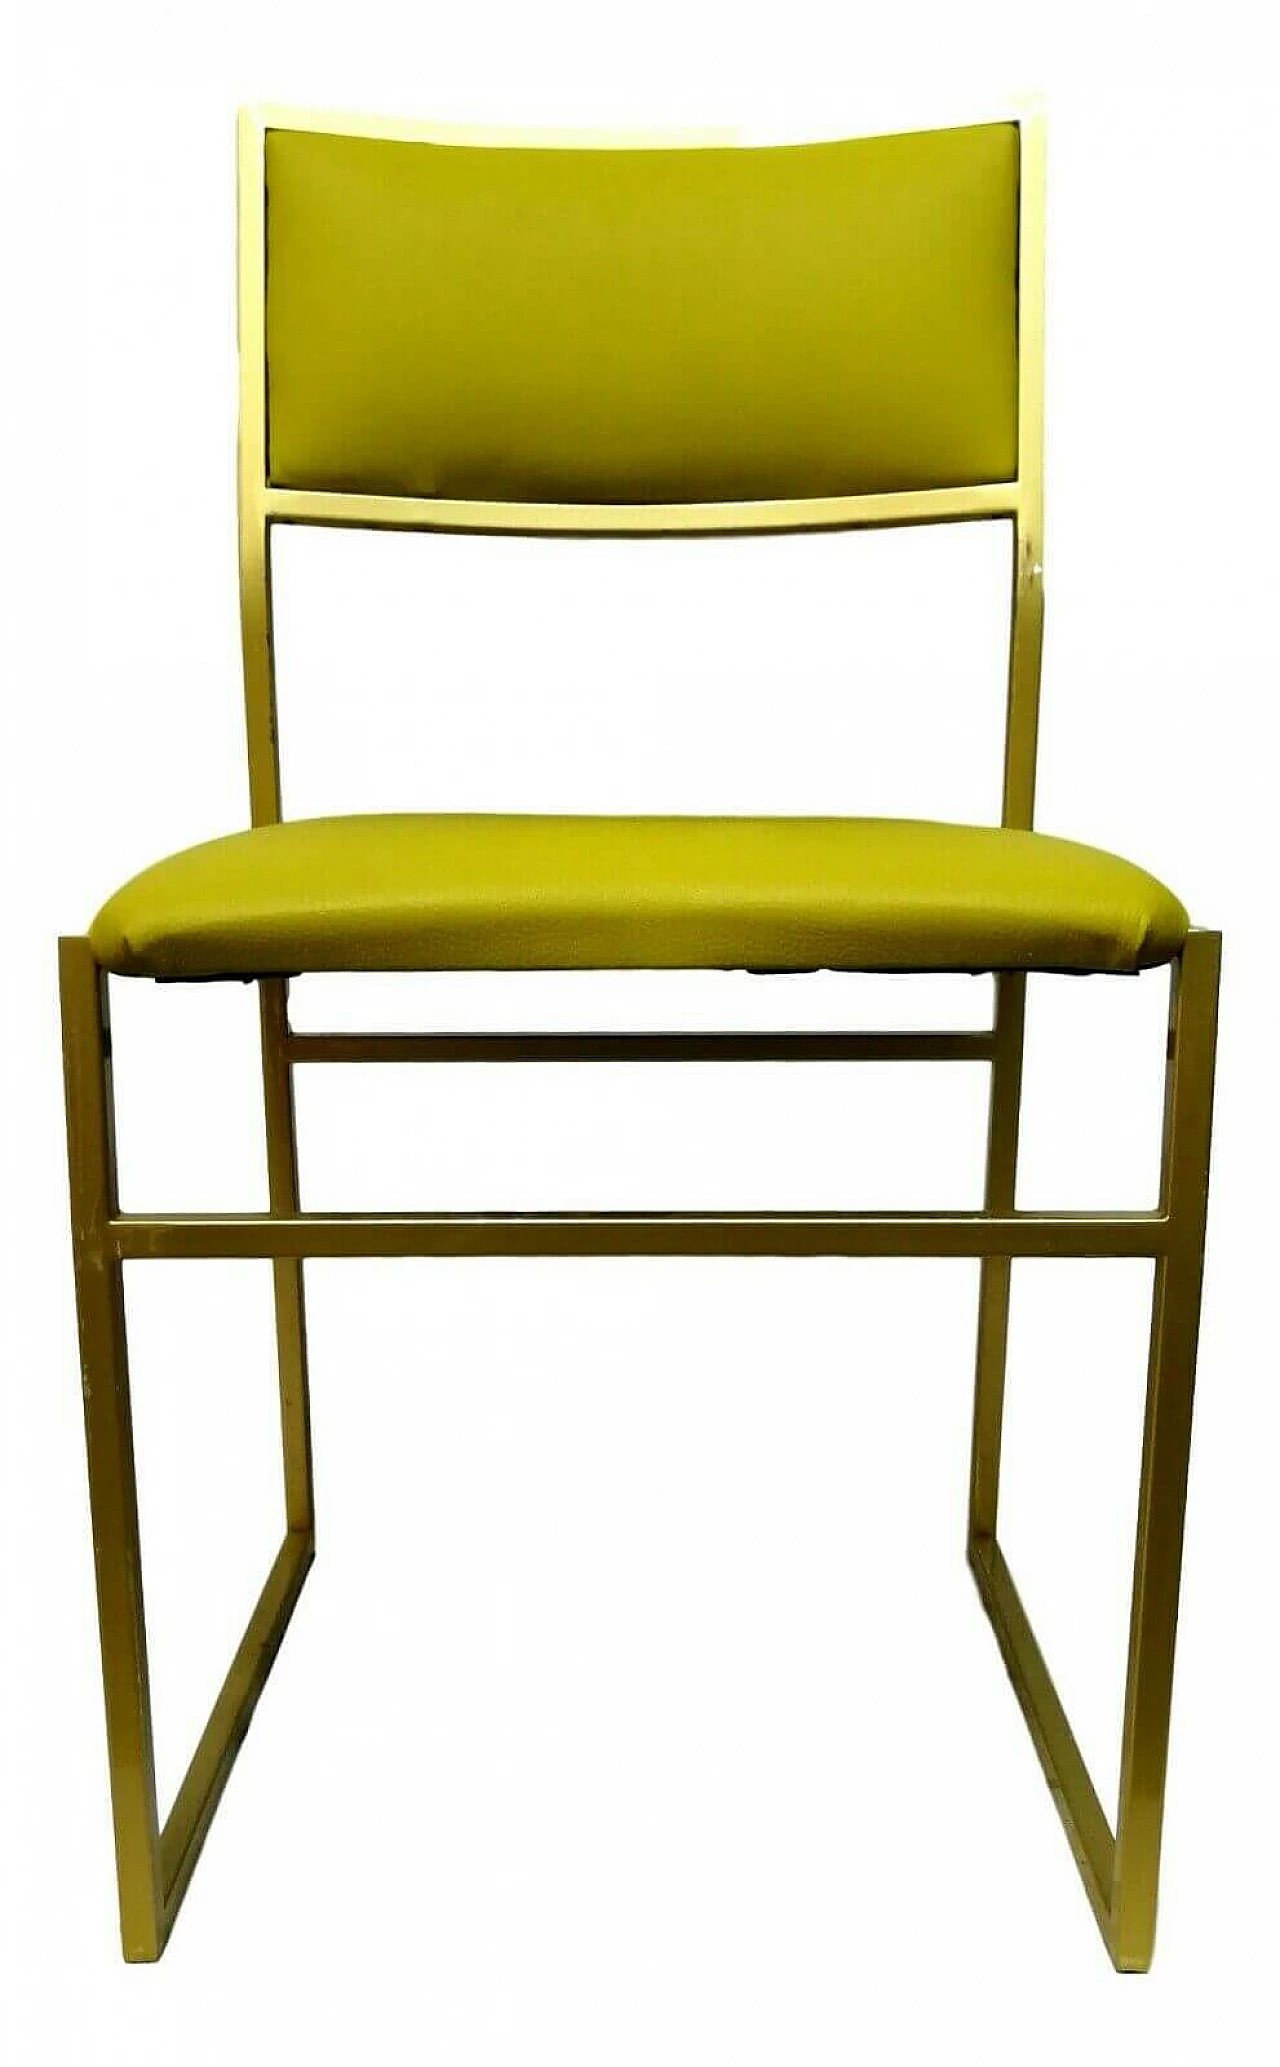 Metal chair and acid green seat, 70s 1166244